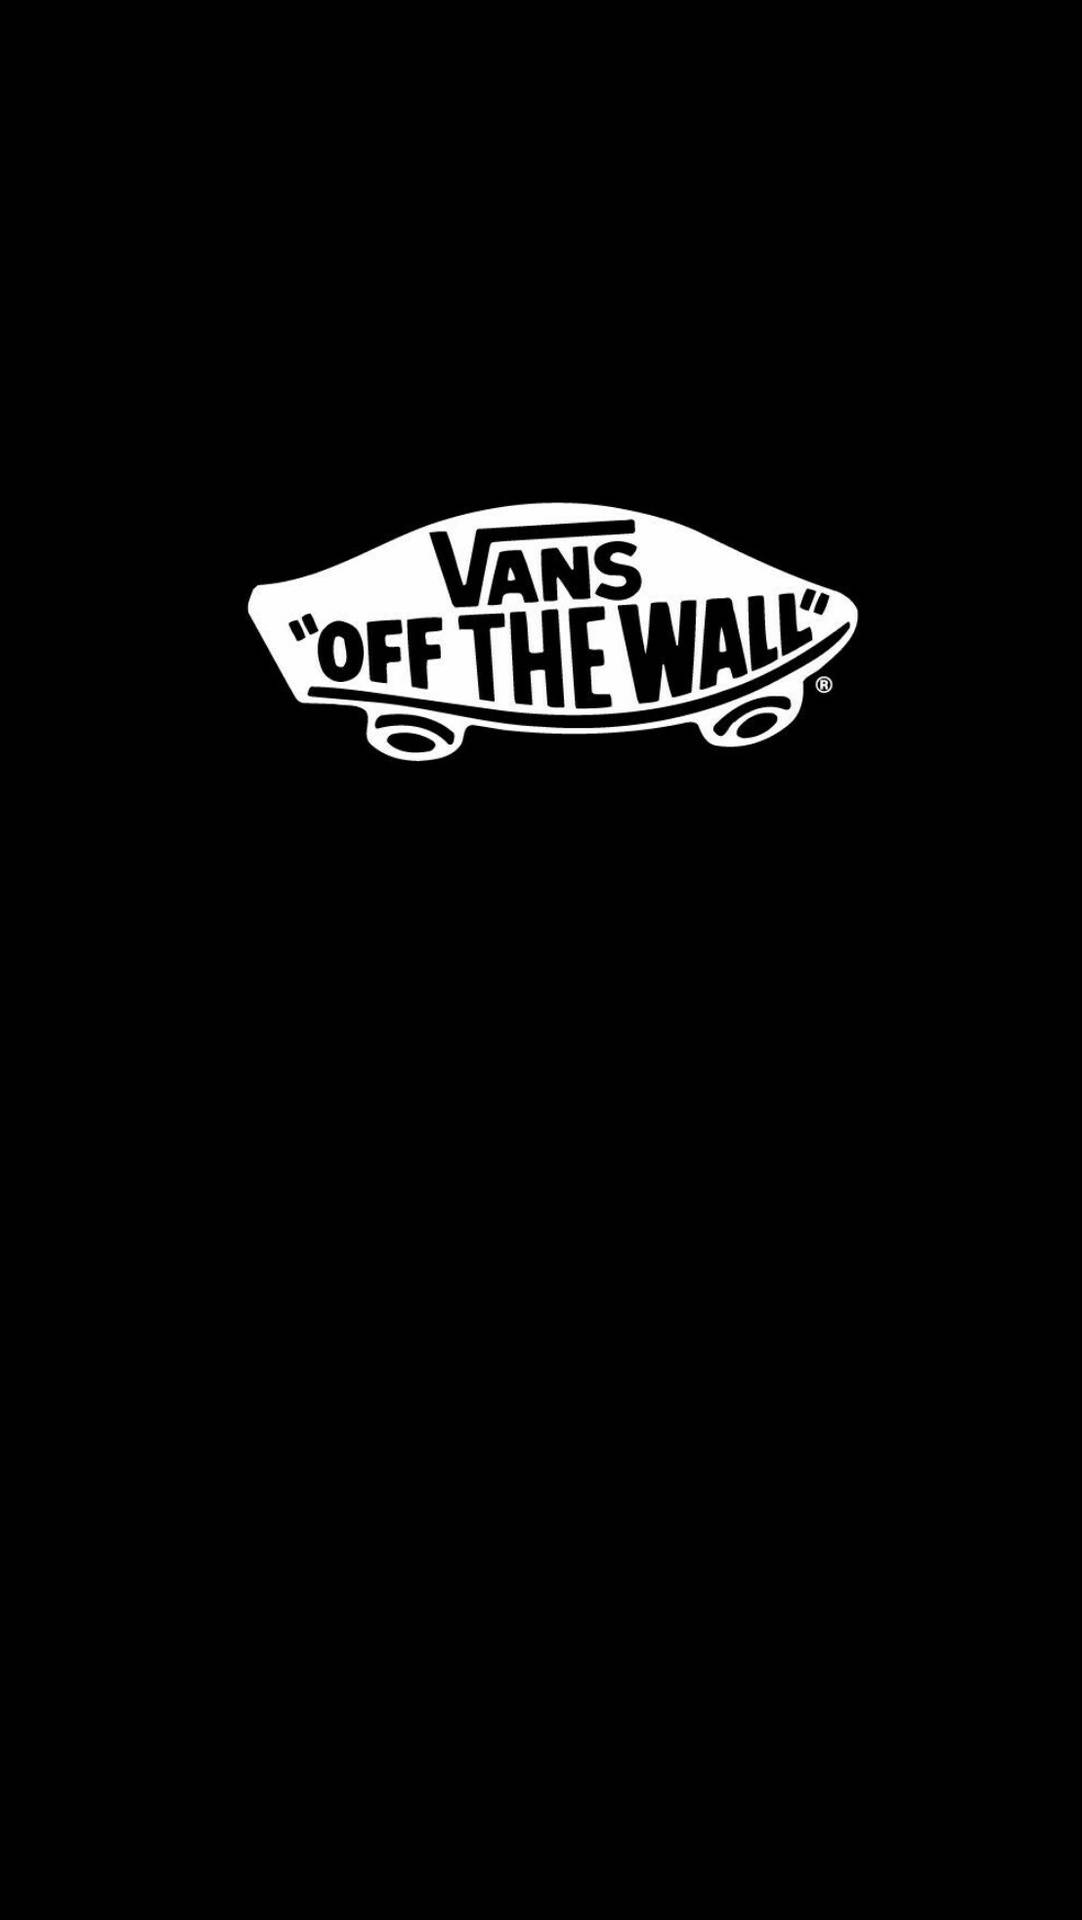 Vans Off The Wall Vertical White Background